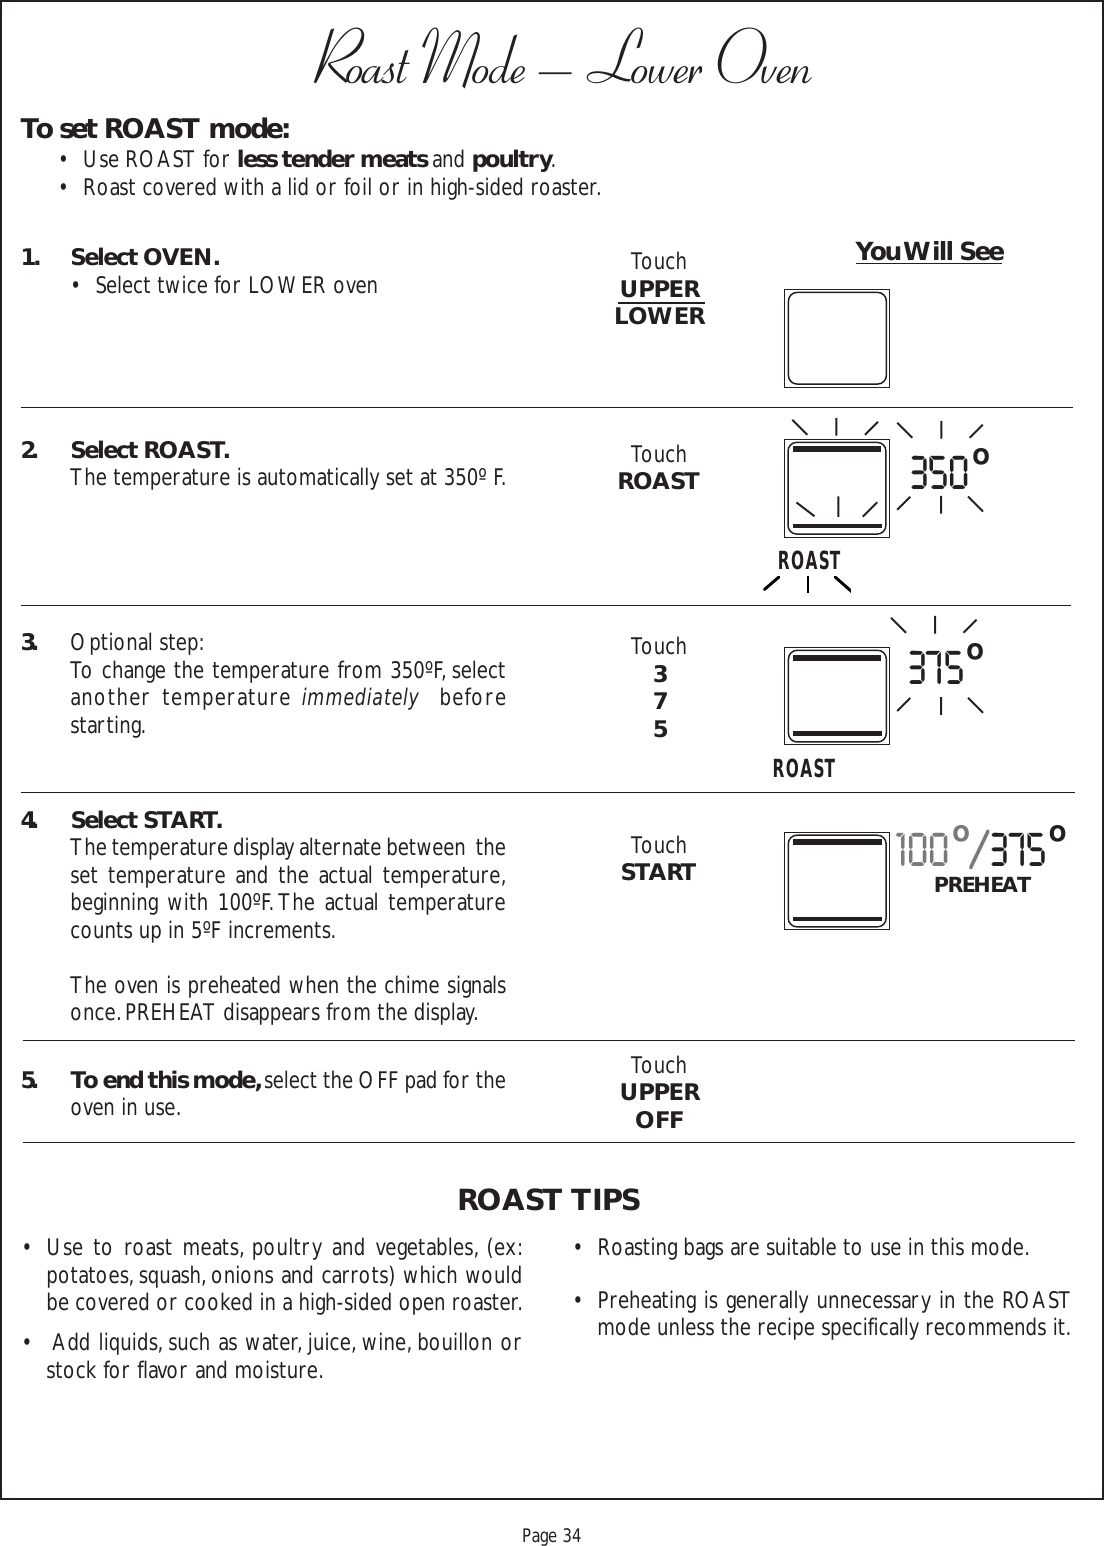 Proof 9-21-99Page 34To set ROAST mode:• Use ROAST for less tender meats and poultry.• Roast covered with a lid or foil or in high-sided roaster.Roast Mode – Lower Oven1. Select OVEN.• Select twice for LOWER oven2. Select ROAST.The temperature is automatically set at 350º F.3. Optional step:To change the temperature from 350ºF, selectanother temperature immediately  beforestarting.4. Select START.The temperature display alternate between  theset temperature and the actual temperature,beginning with 100ºF. The actual temperaturecounts up in 5ºF increments.The oven is preheated when the chime signalsonce. PREHEAT disappears from the display.5. To end this mode, select the OFF pad for theoven in use.You Will See• Use to roast meats, poultry and vegetables, (ex:potatoes, squash, onions and carrots) which wouldbe covered or cooked in a high-sided open roaster.•  Add liquids, such as water, juice, wine, bouillon orstock for flavor and moisture.ROAST TIPSTouchUPPERLOWERTouchROASTTouch375TouchSTARTTouchUPPEROFF• Roasting bags are suitable to use in this mode.• Preheating is generally unnecessary in the ROASTmode unless the recipe specifically recommends it.100o/375oPREHEAT375oROAST350oROAST